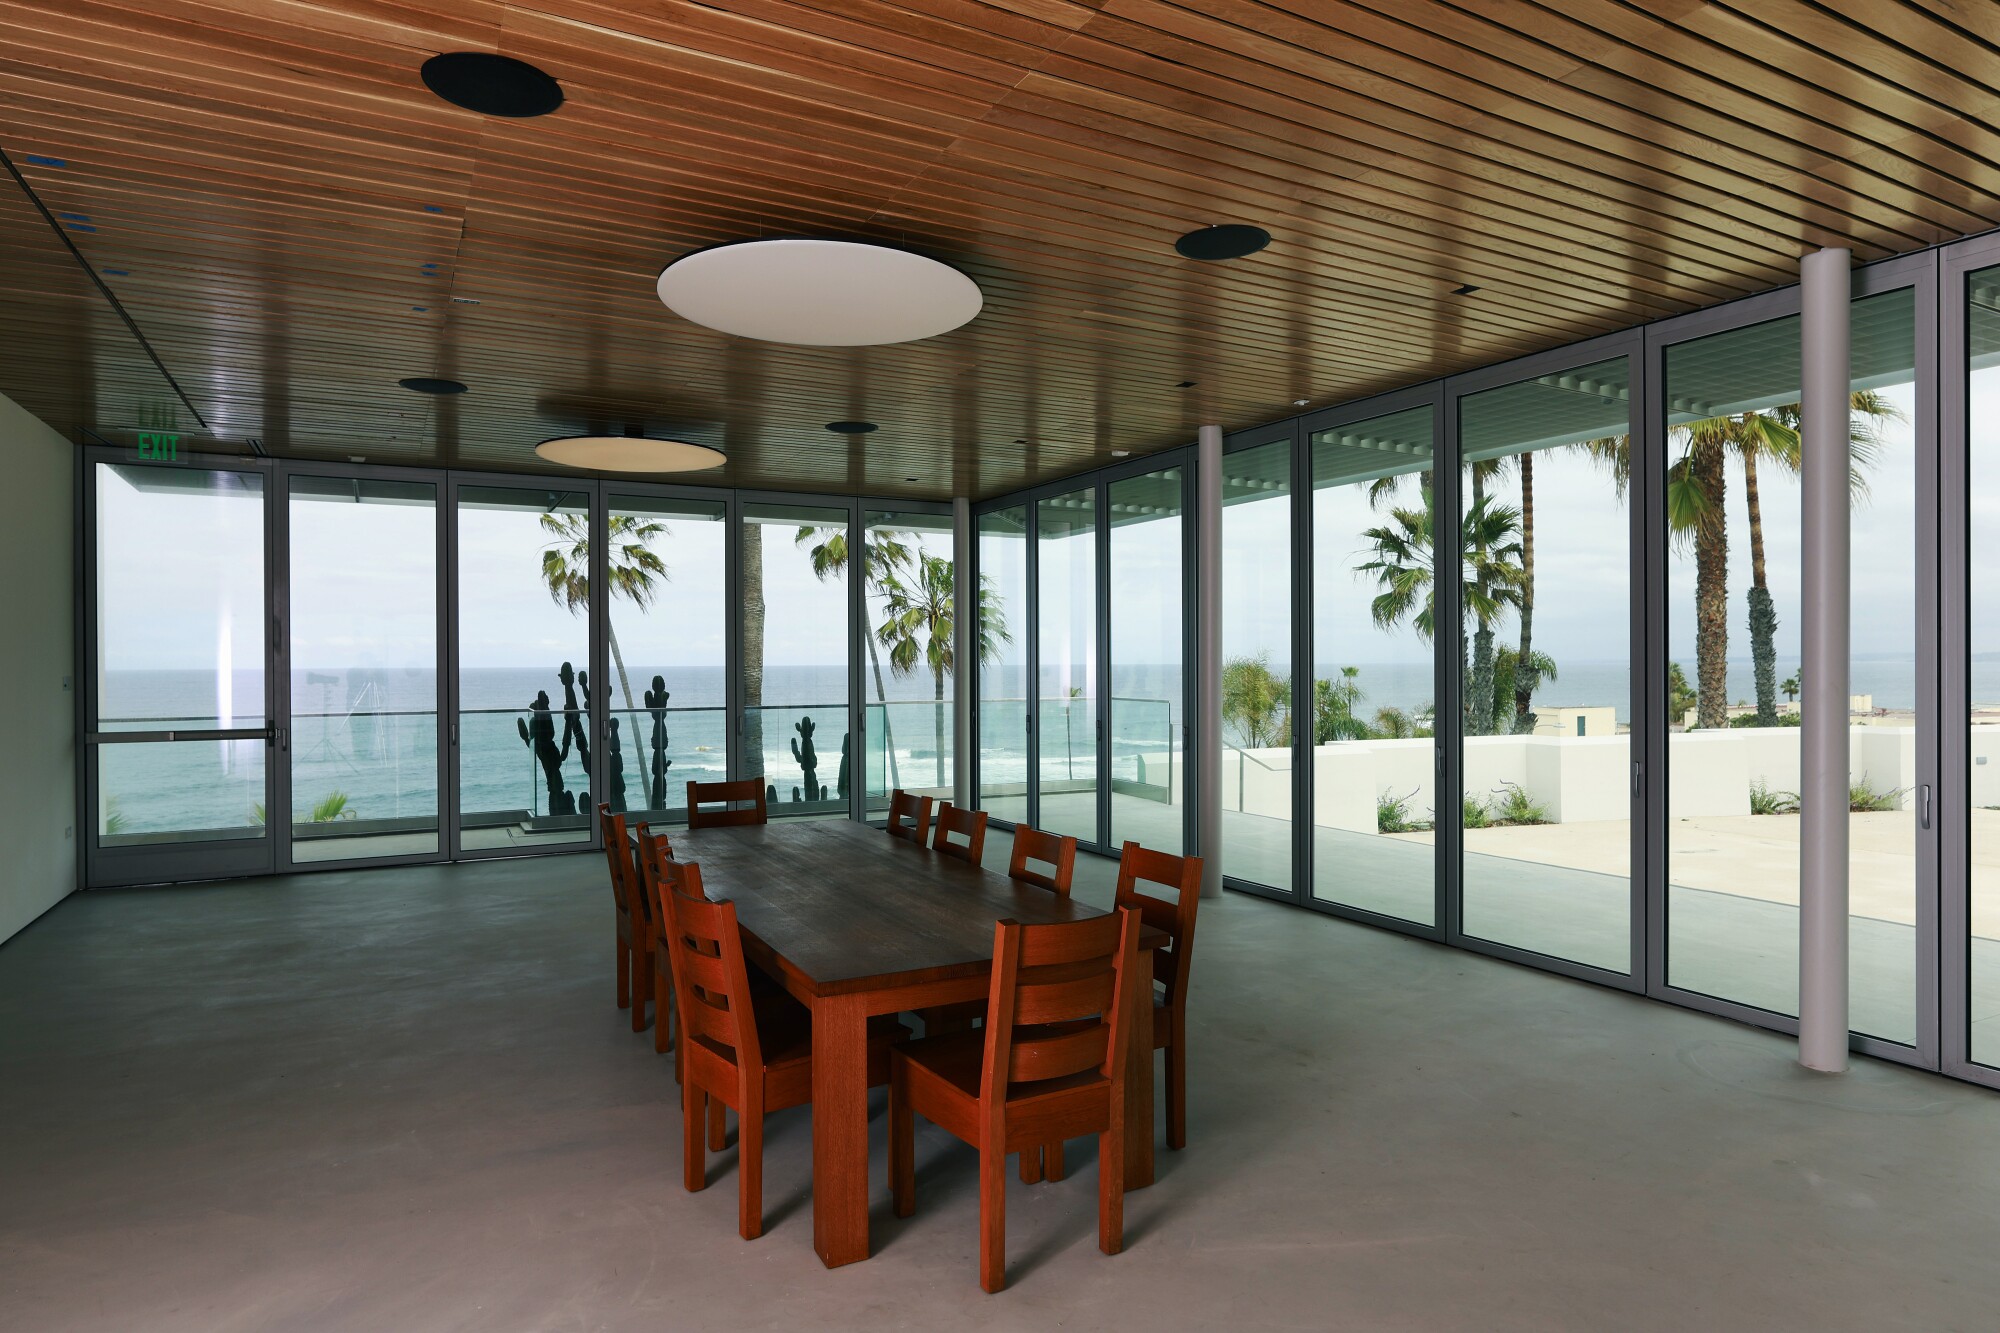 A red dining table in the middle of a room, with views of palm trees and the ocean seen through  glass walls